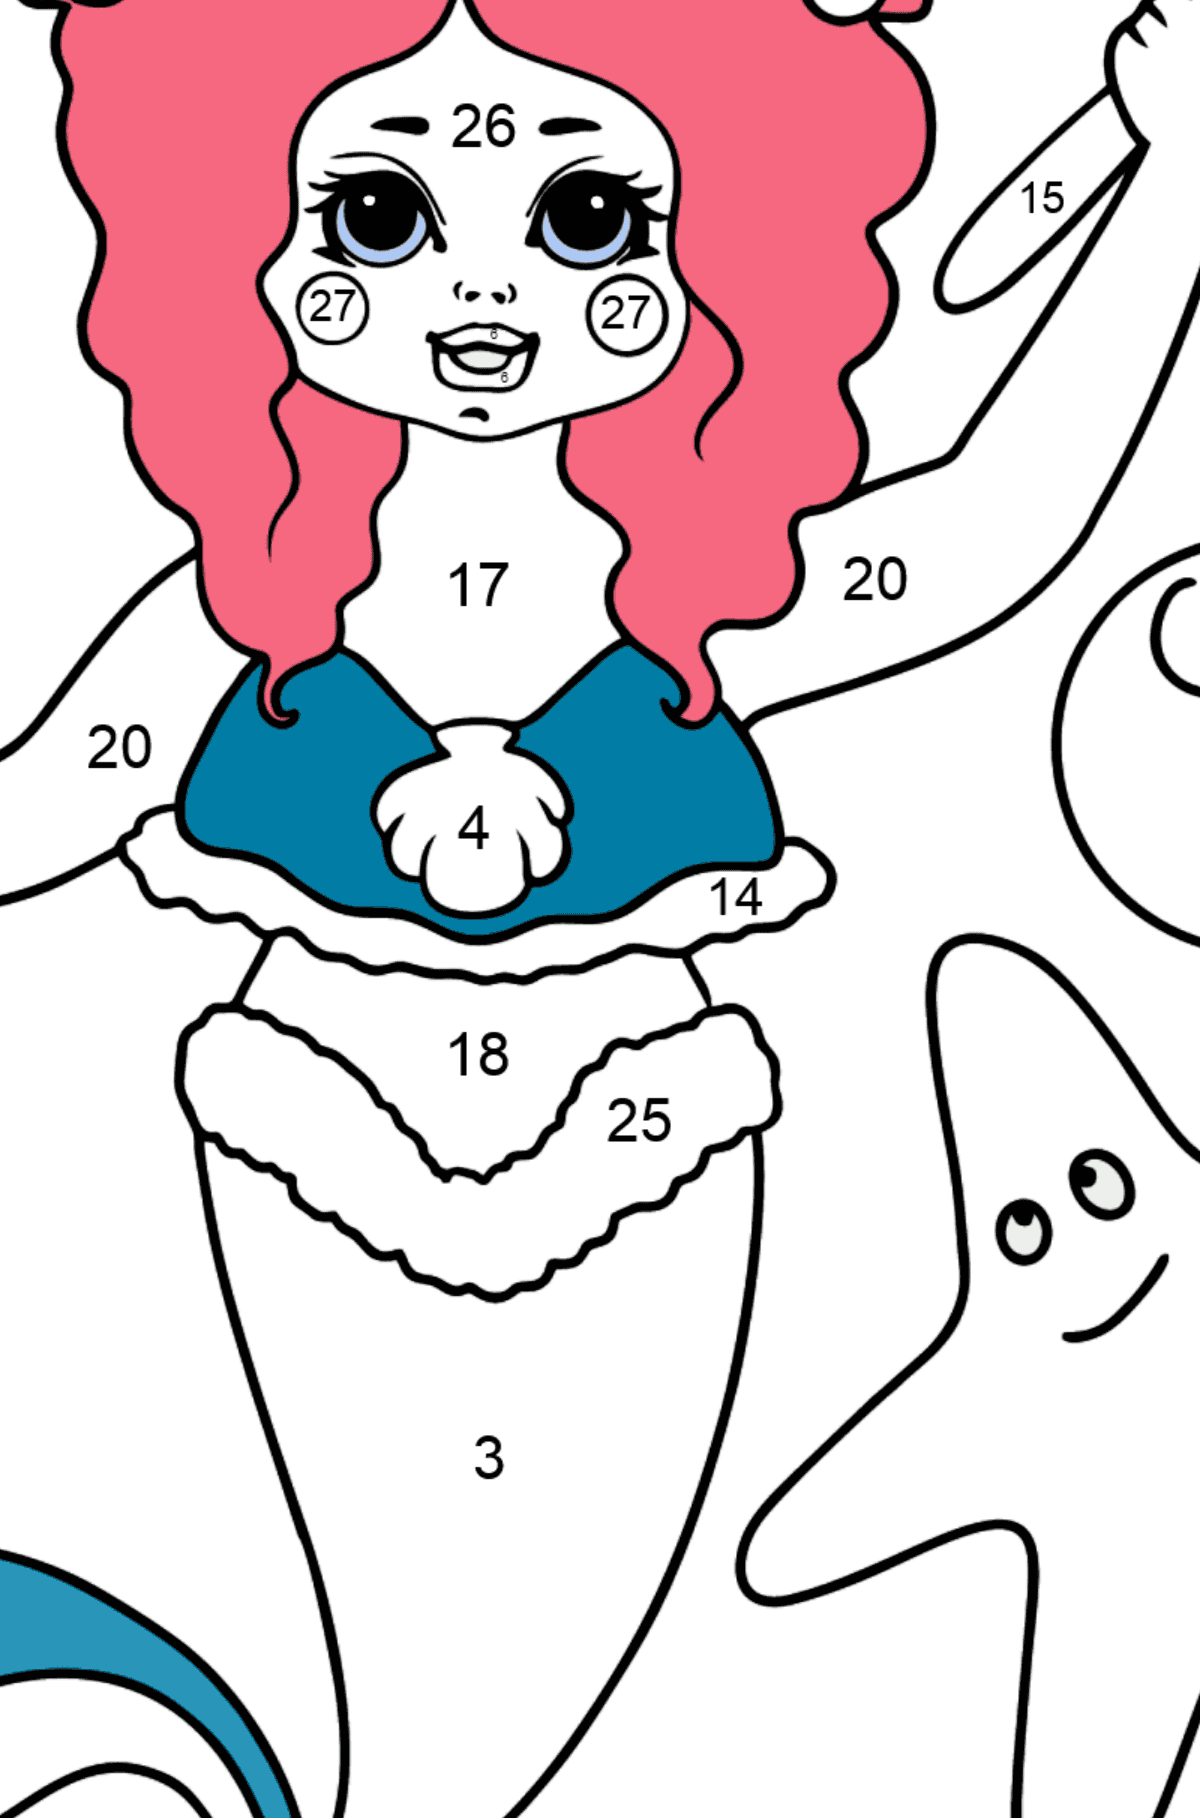 Mermaid and Maracas coloring page - Coloring by Numbers for Kids